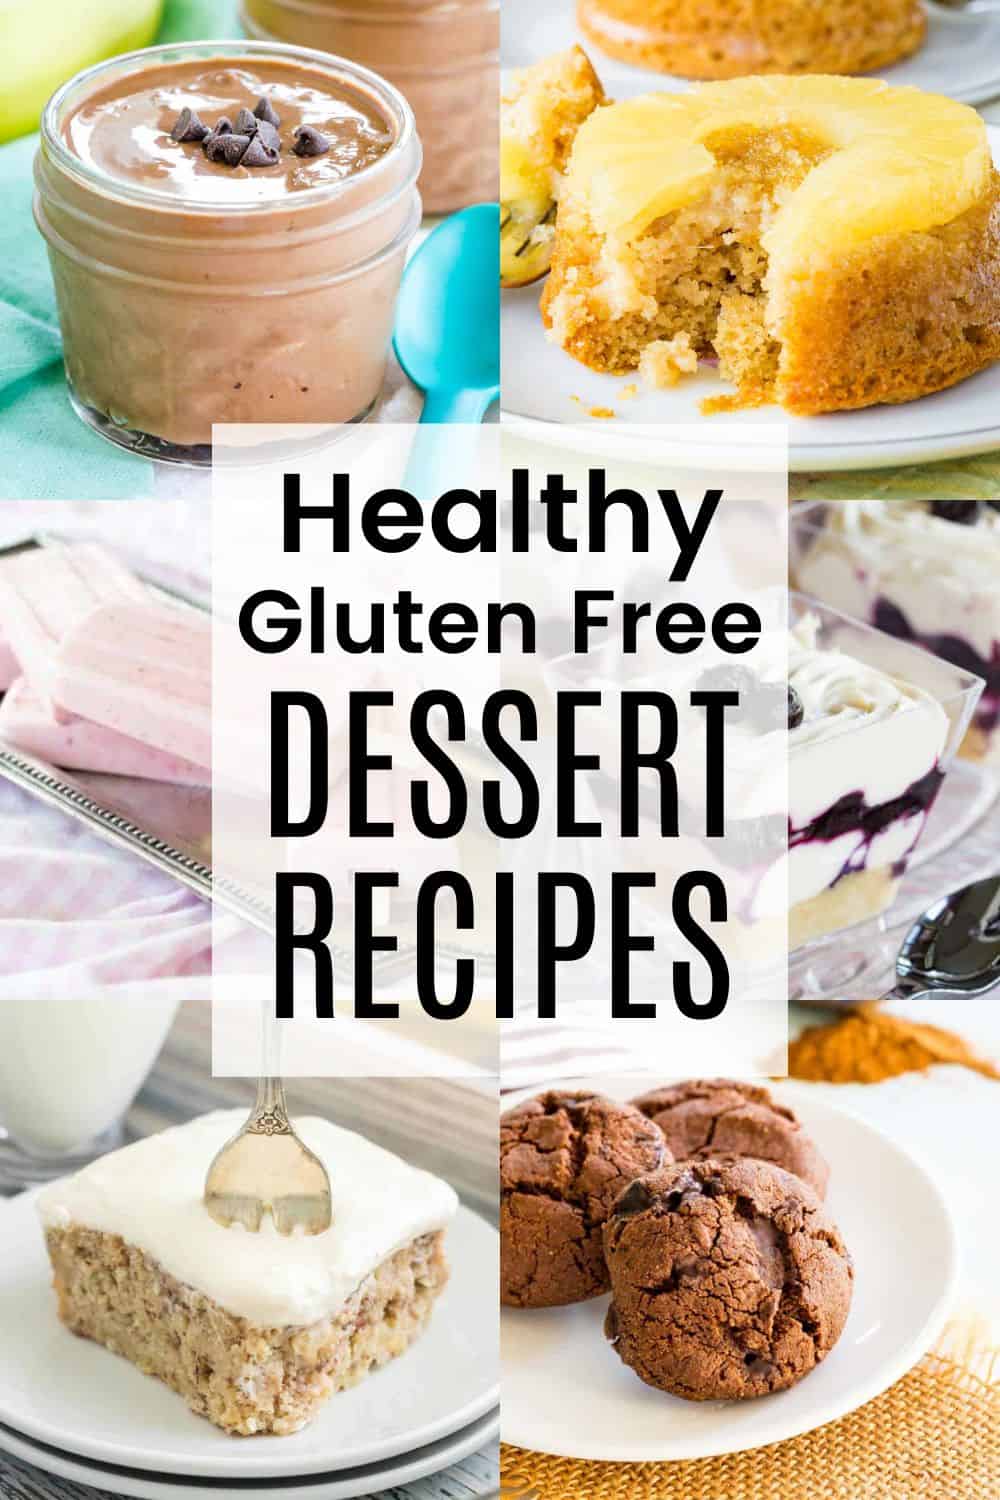 A two-by-three collage of chocolate pudding, a mini pineapple upside down cake, chocolate chunk cookies on a plate, and more with a translucent white box in the middle with text overlay that says "Healthy Gluten Free Desserts".